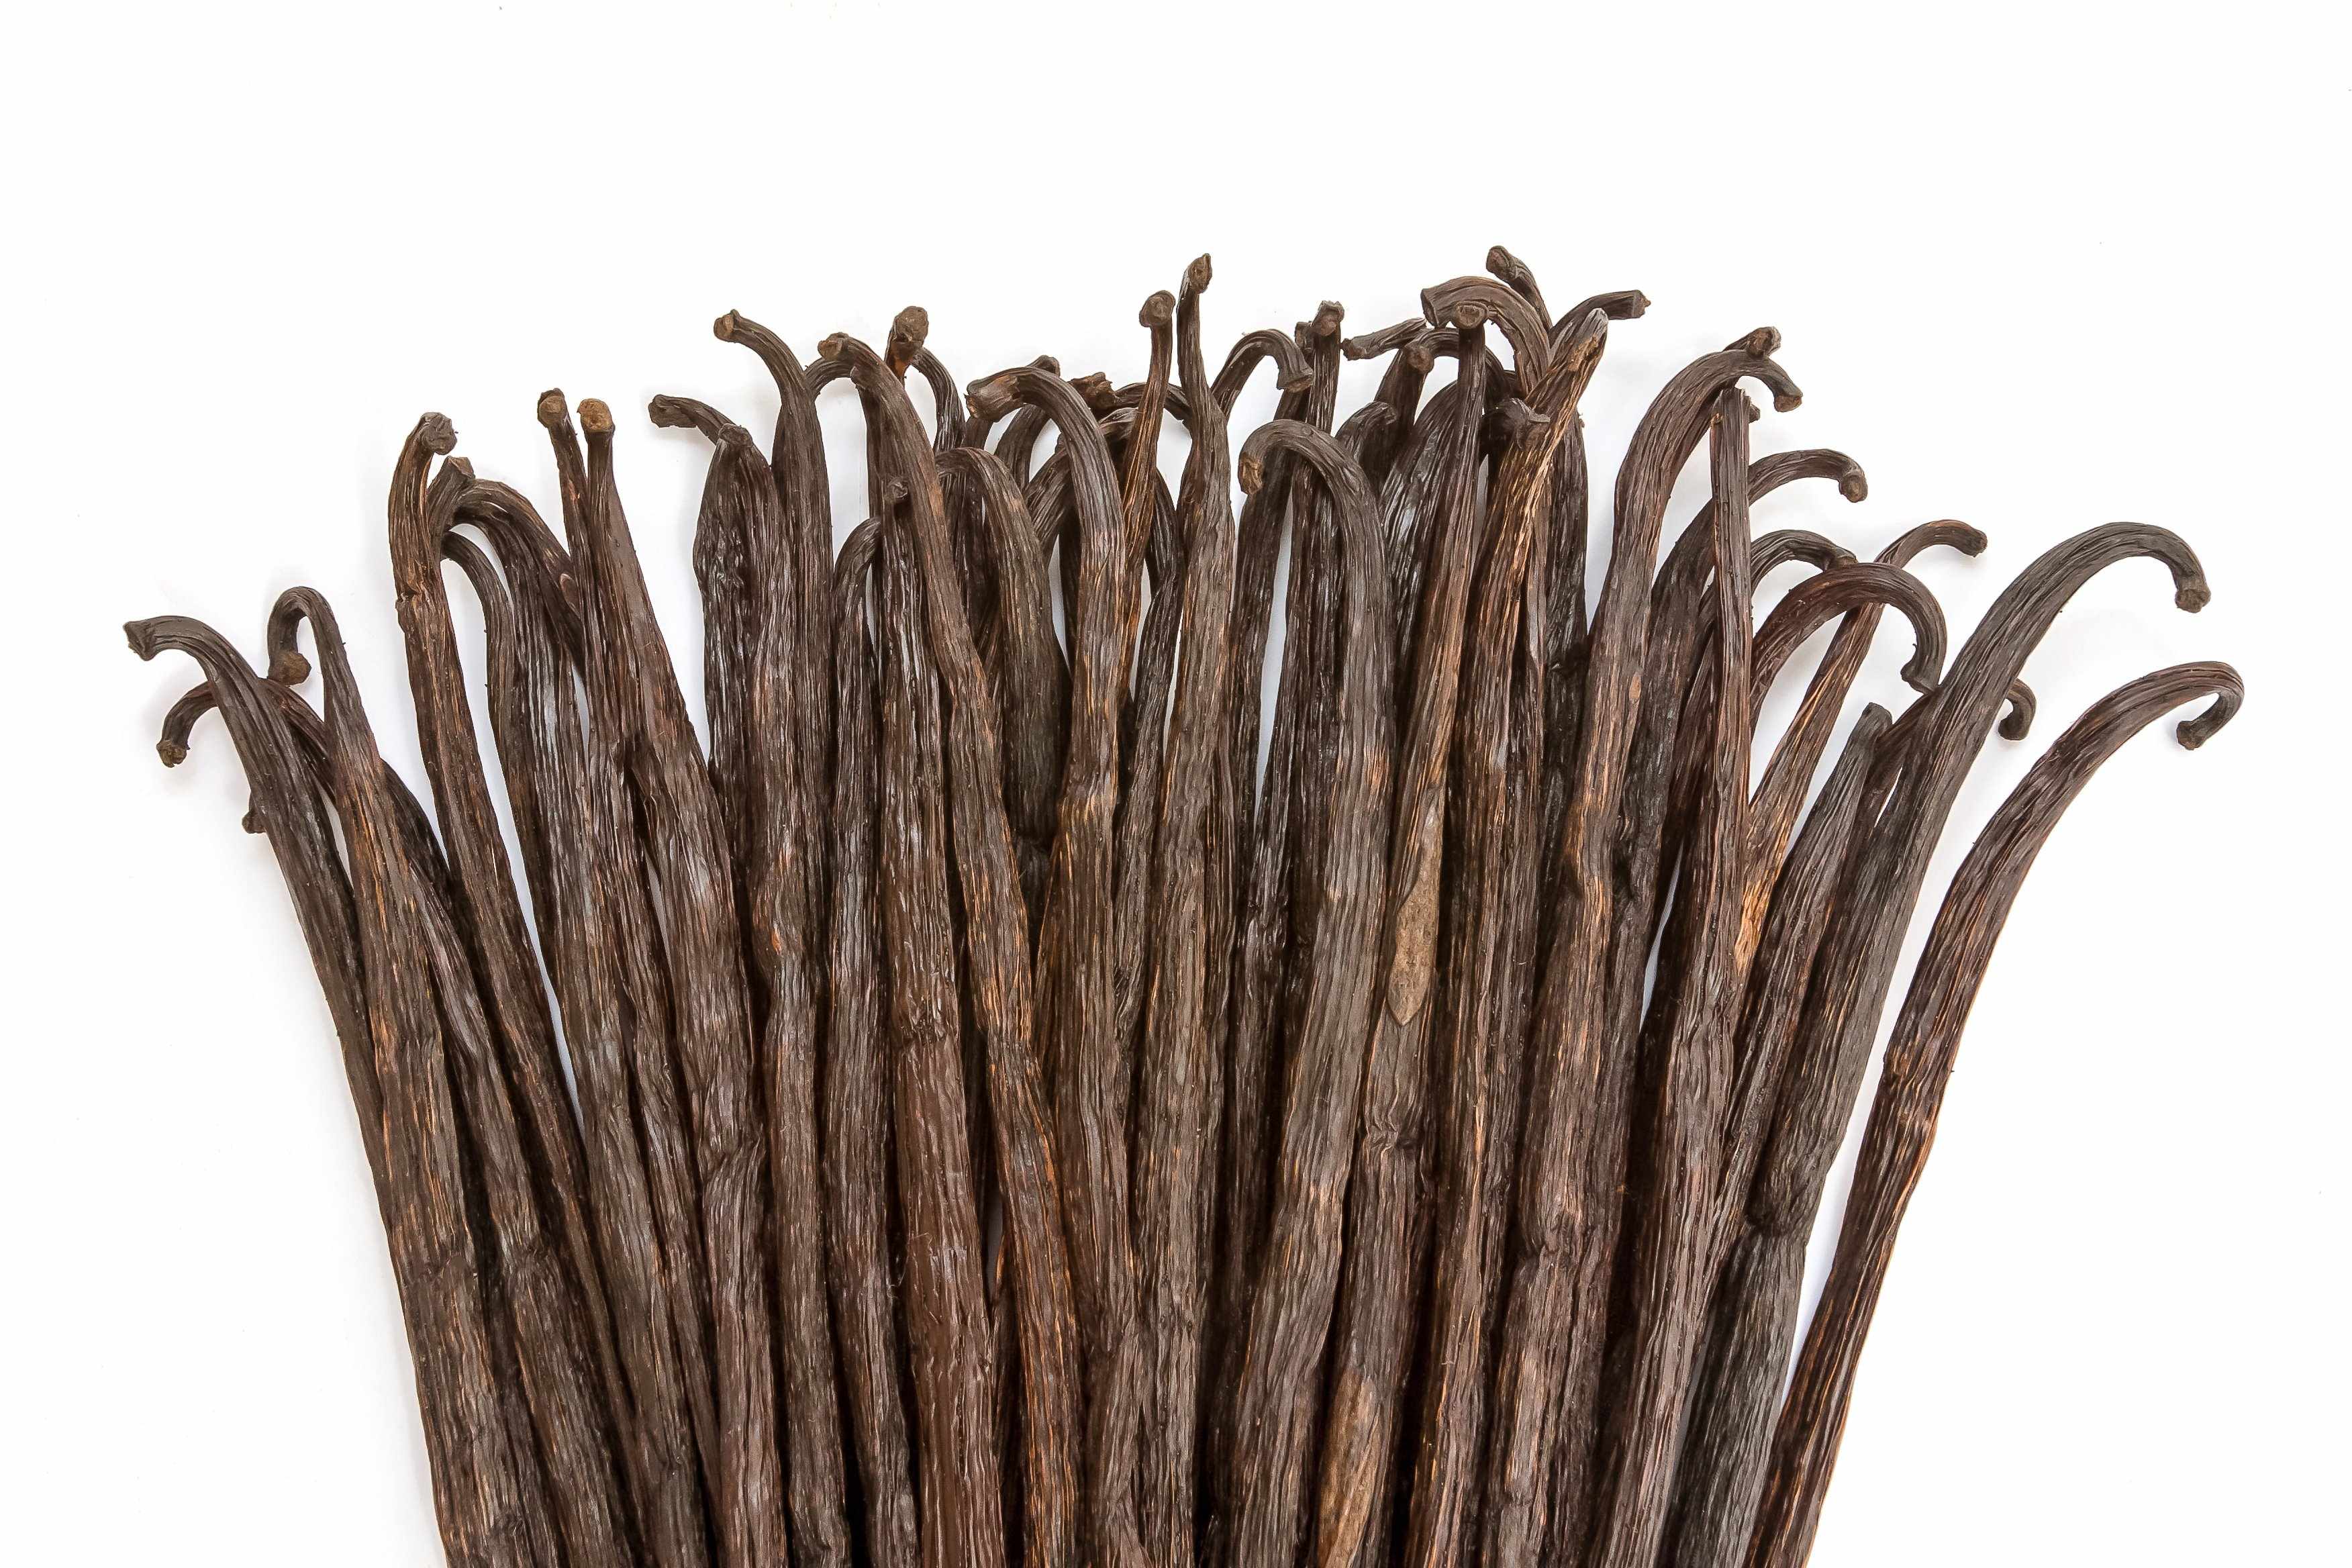  Madagascar Vanilla Beans  Whole Grade B Pods for Extract 